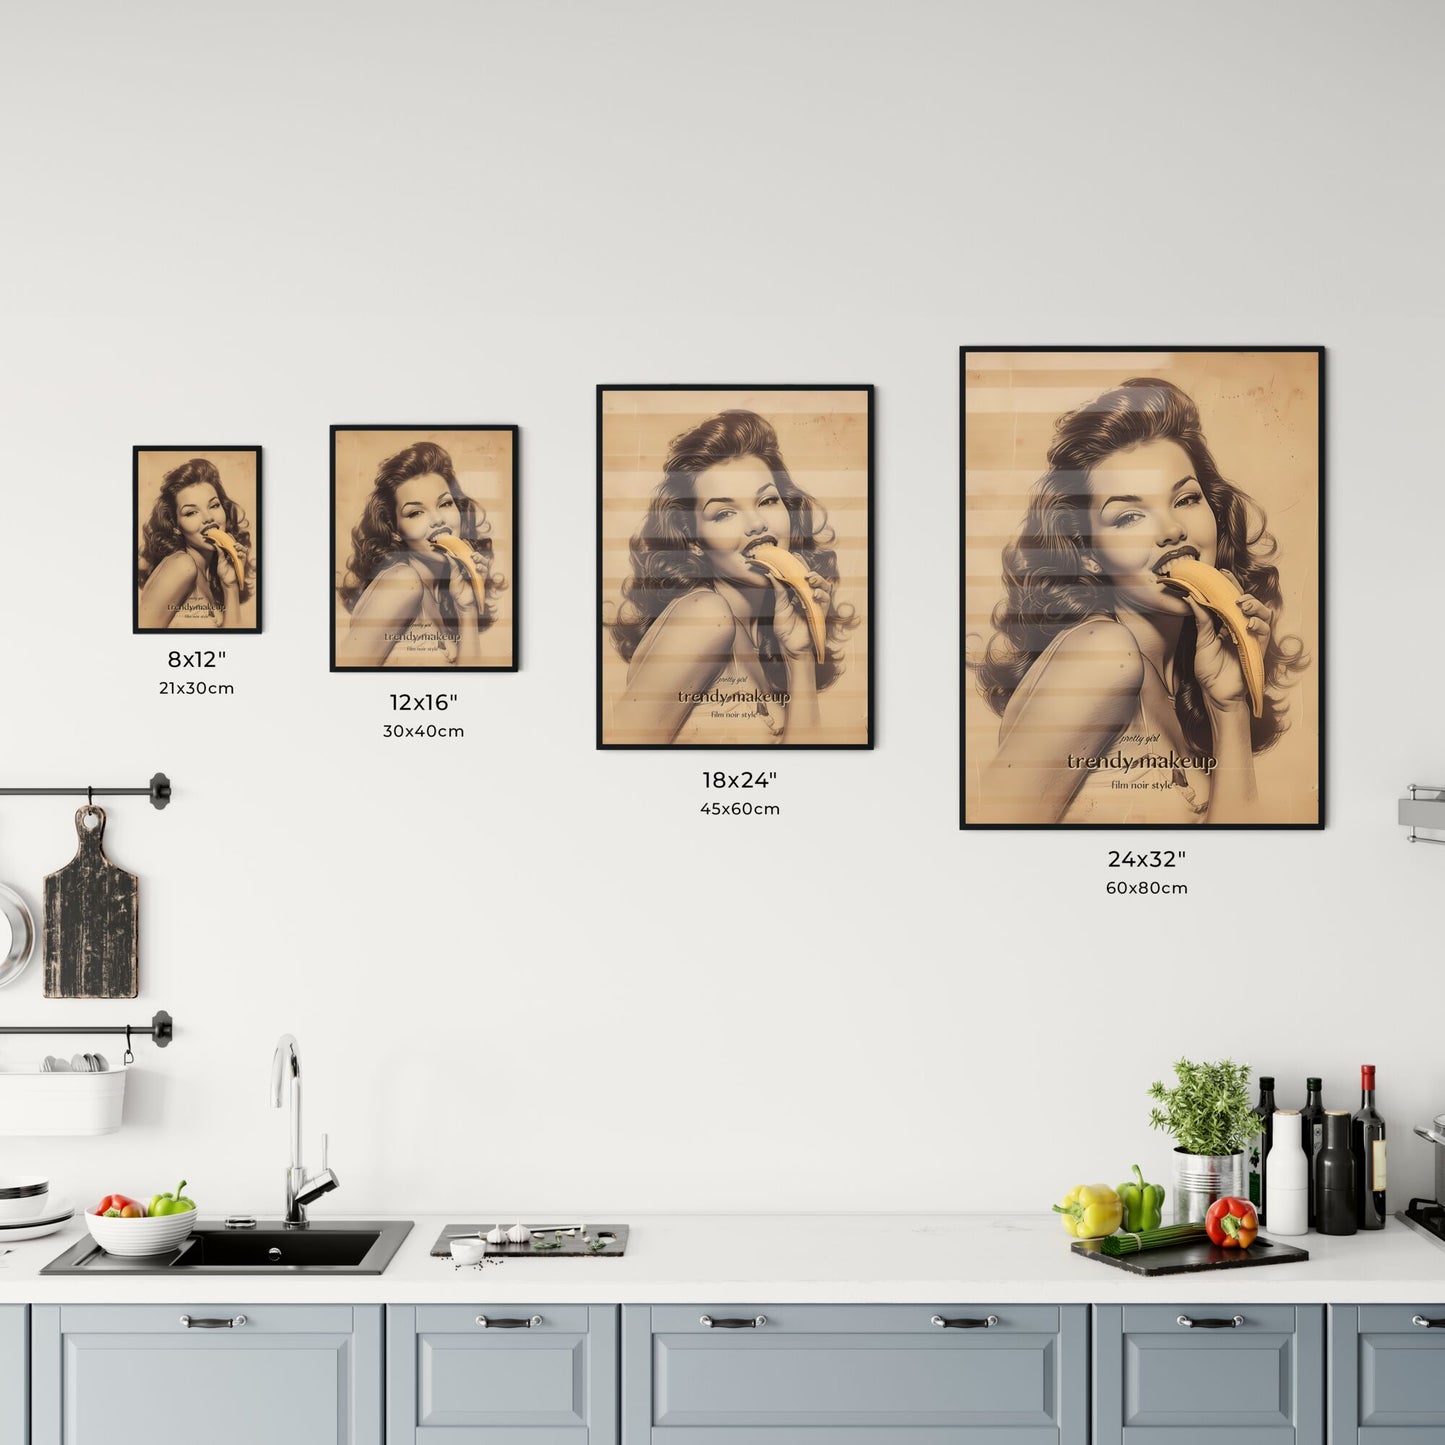 pretty girl, trendy makeup, film noir style, A Poster of a woman eating a banana Default Title